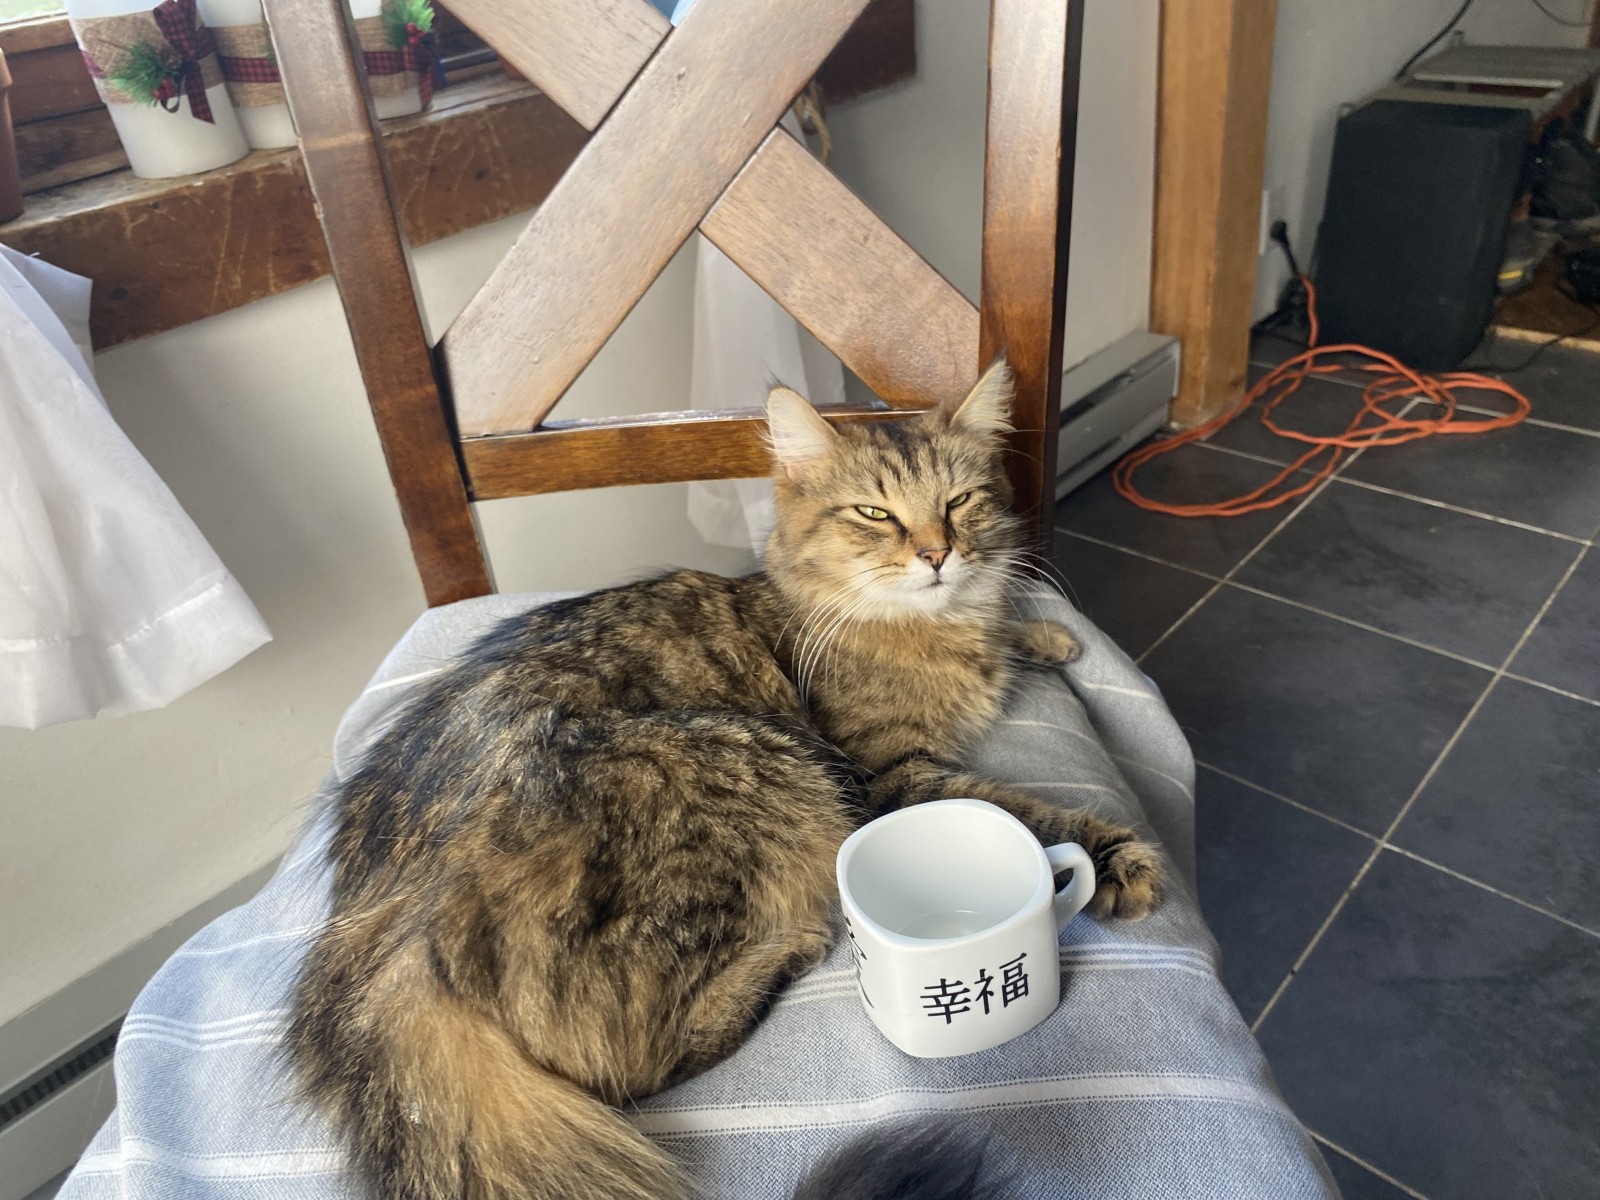 Tea with the cat